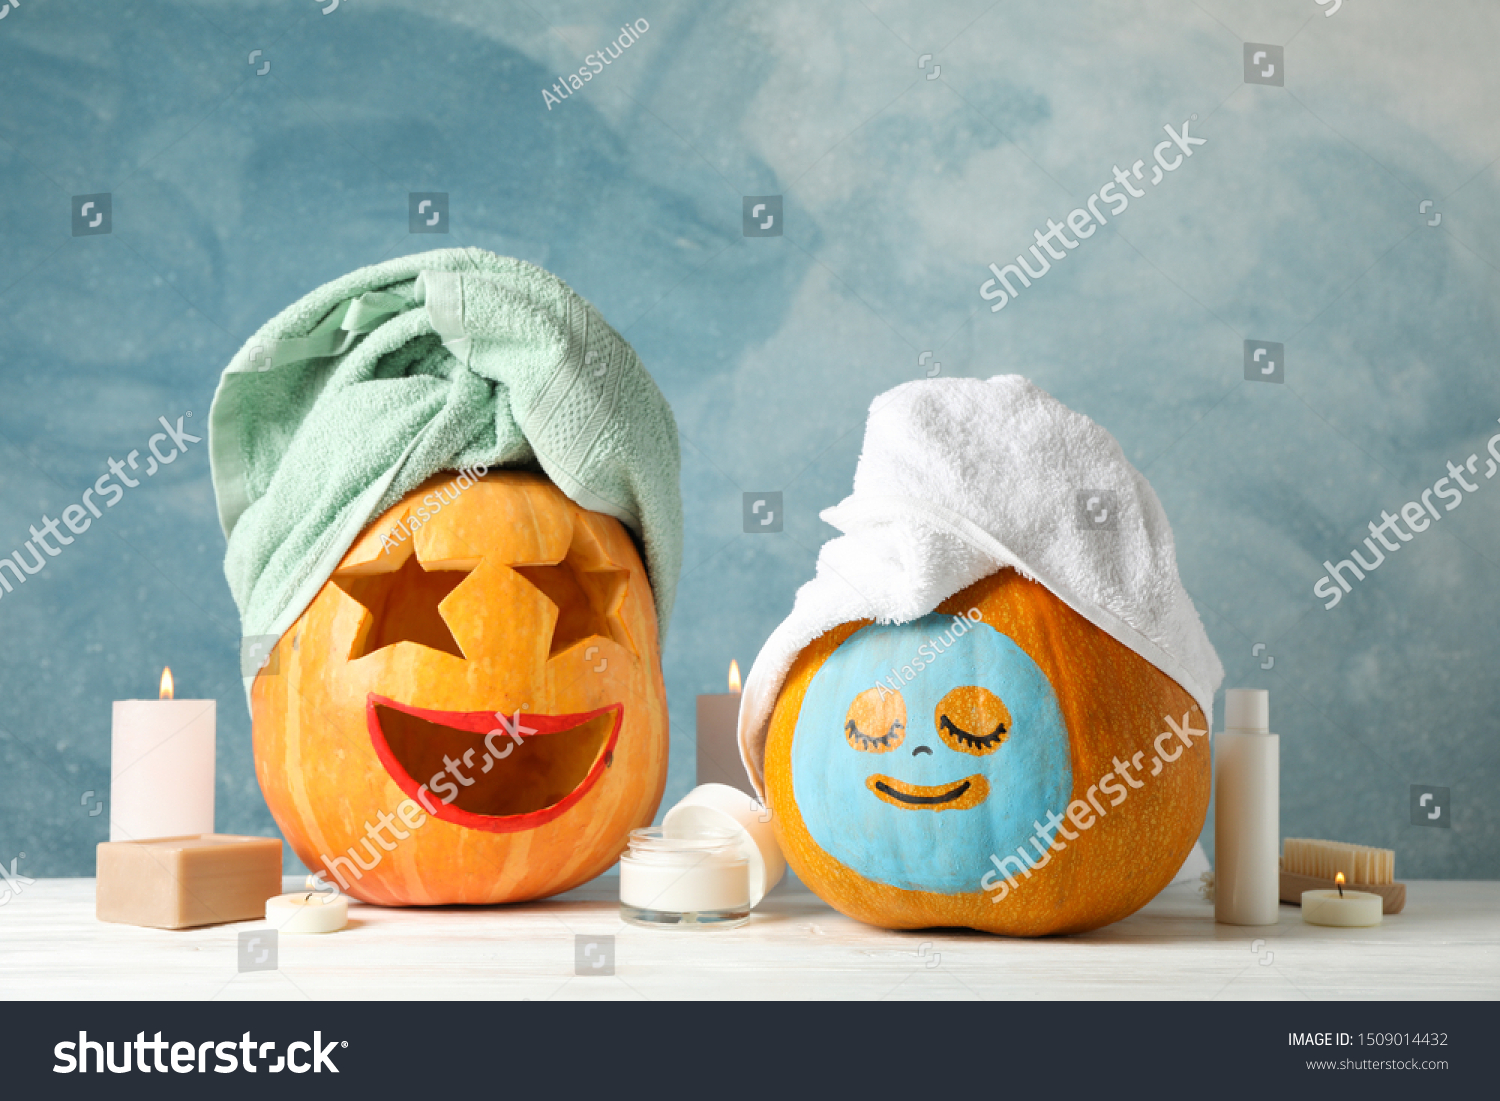 Funny pumpkins and skin care accessories on white background, copy space #1509014432